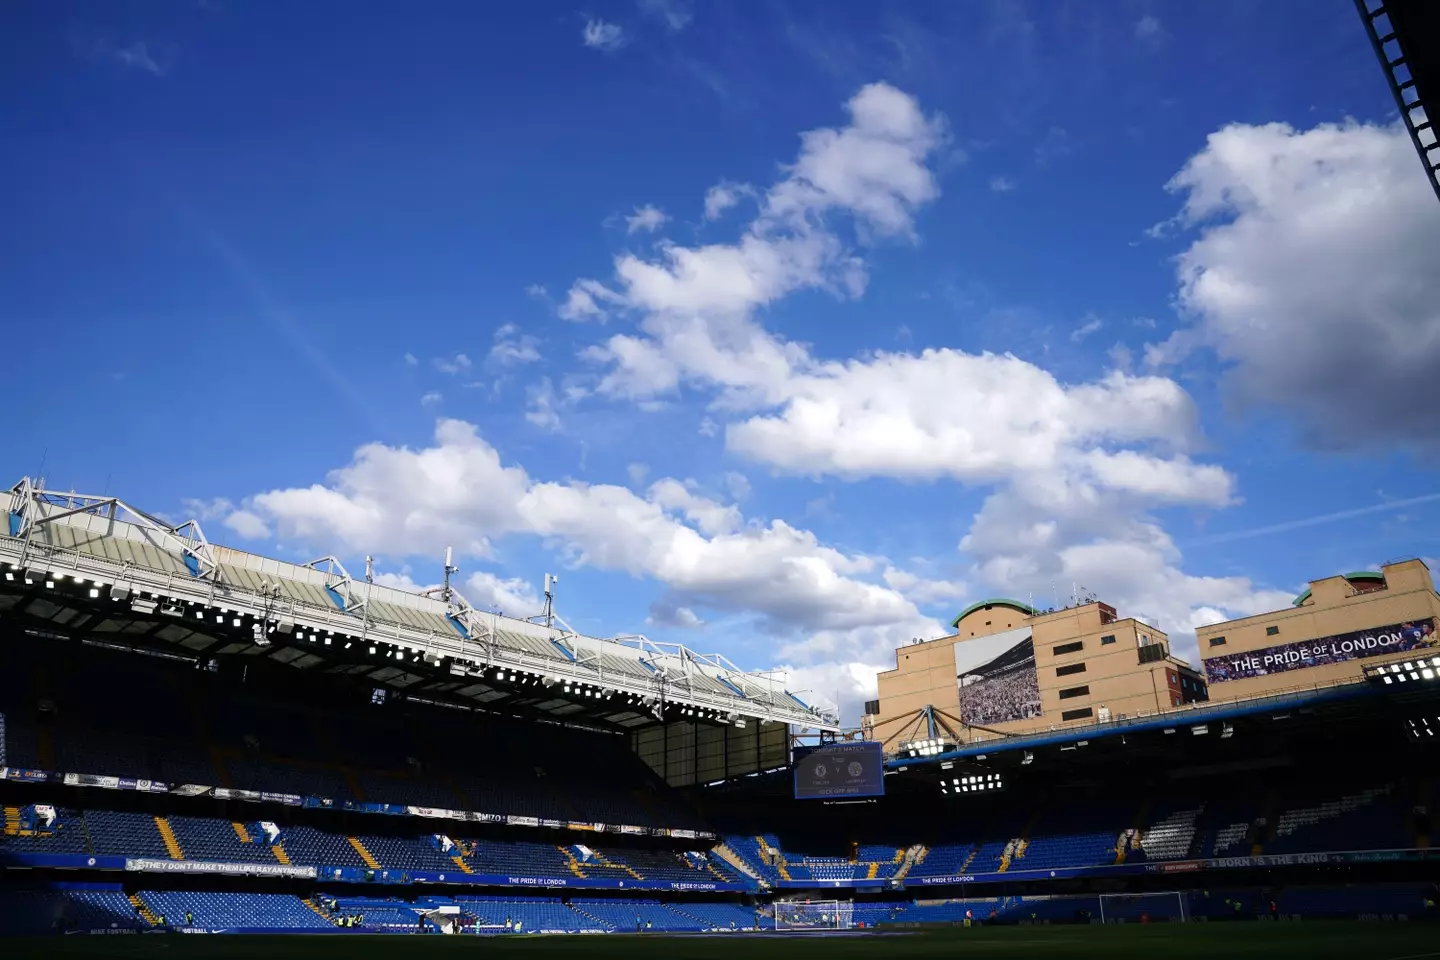 A general view of Stamford Bridge, home of Chelsea FC. (Alamy)